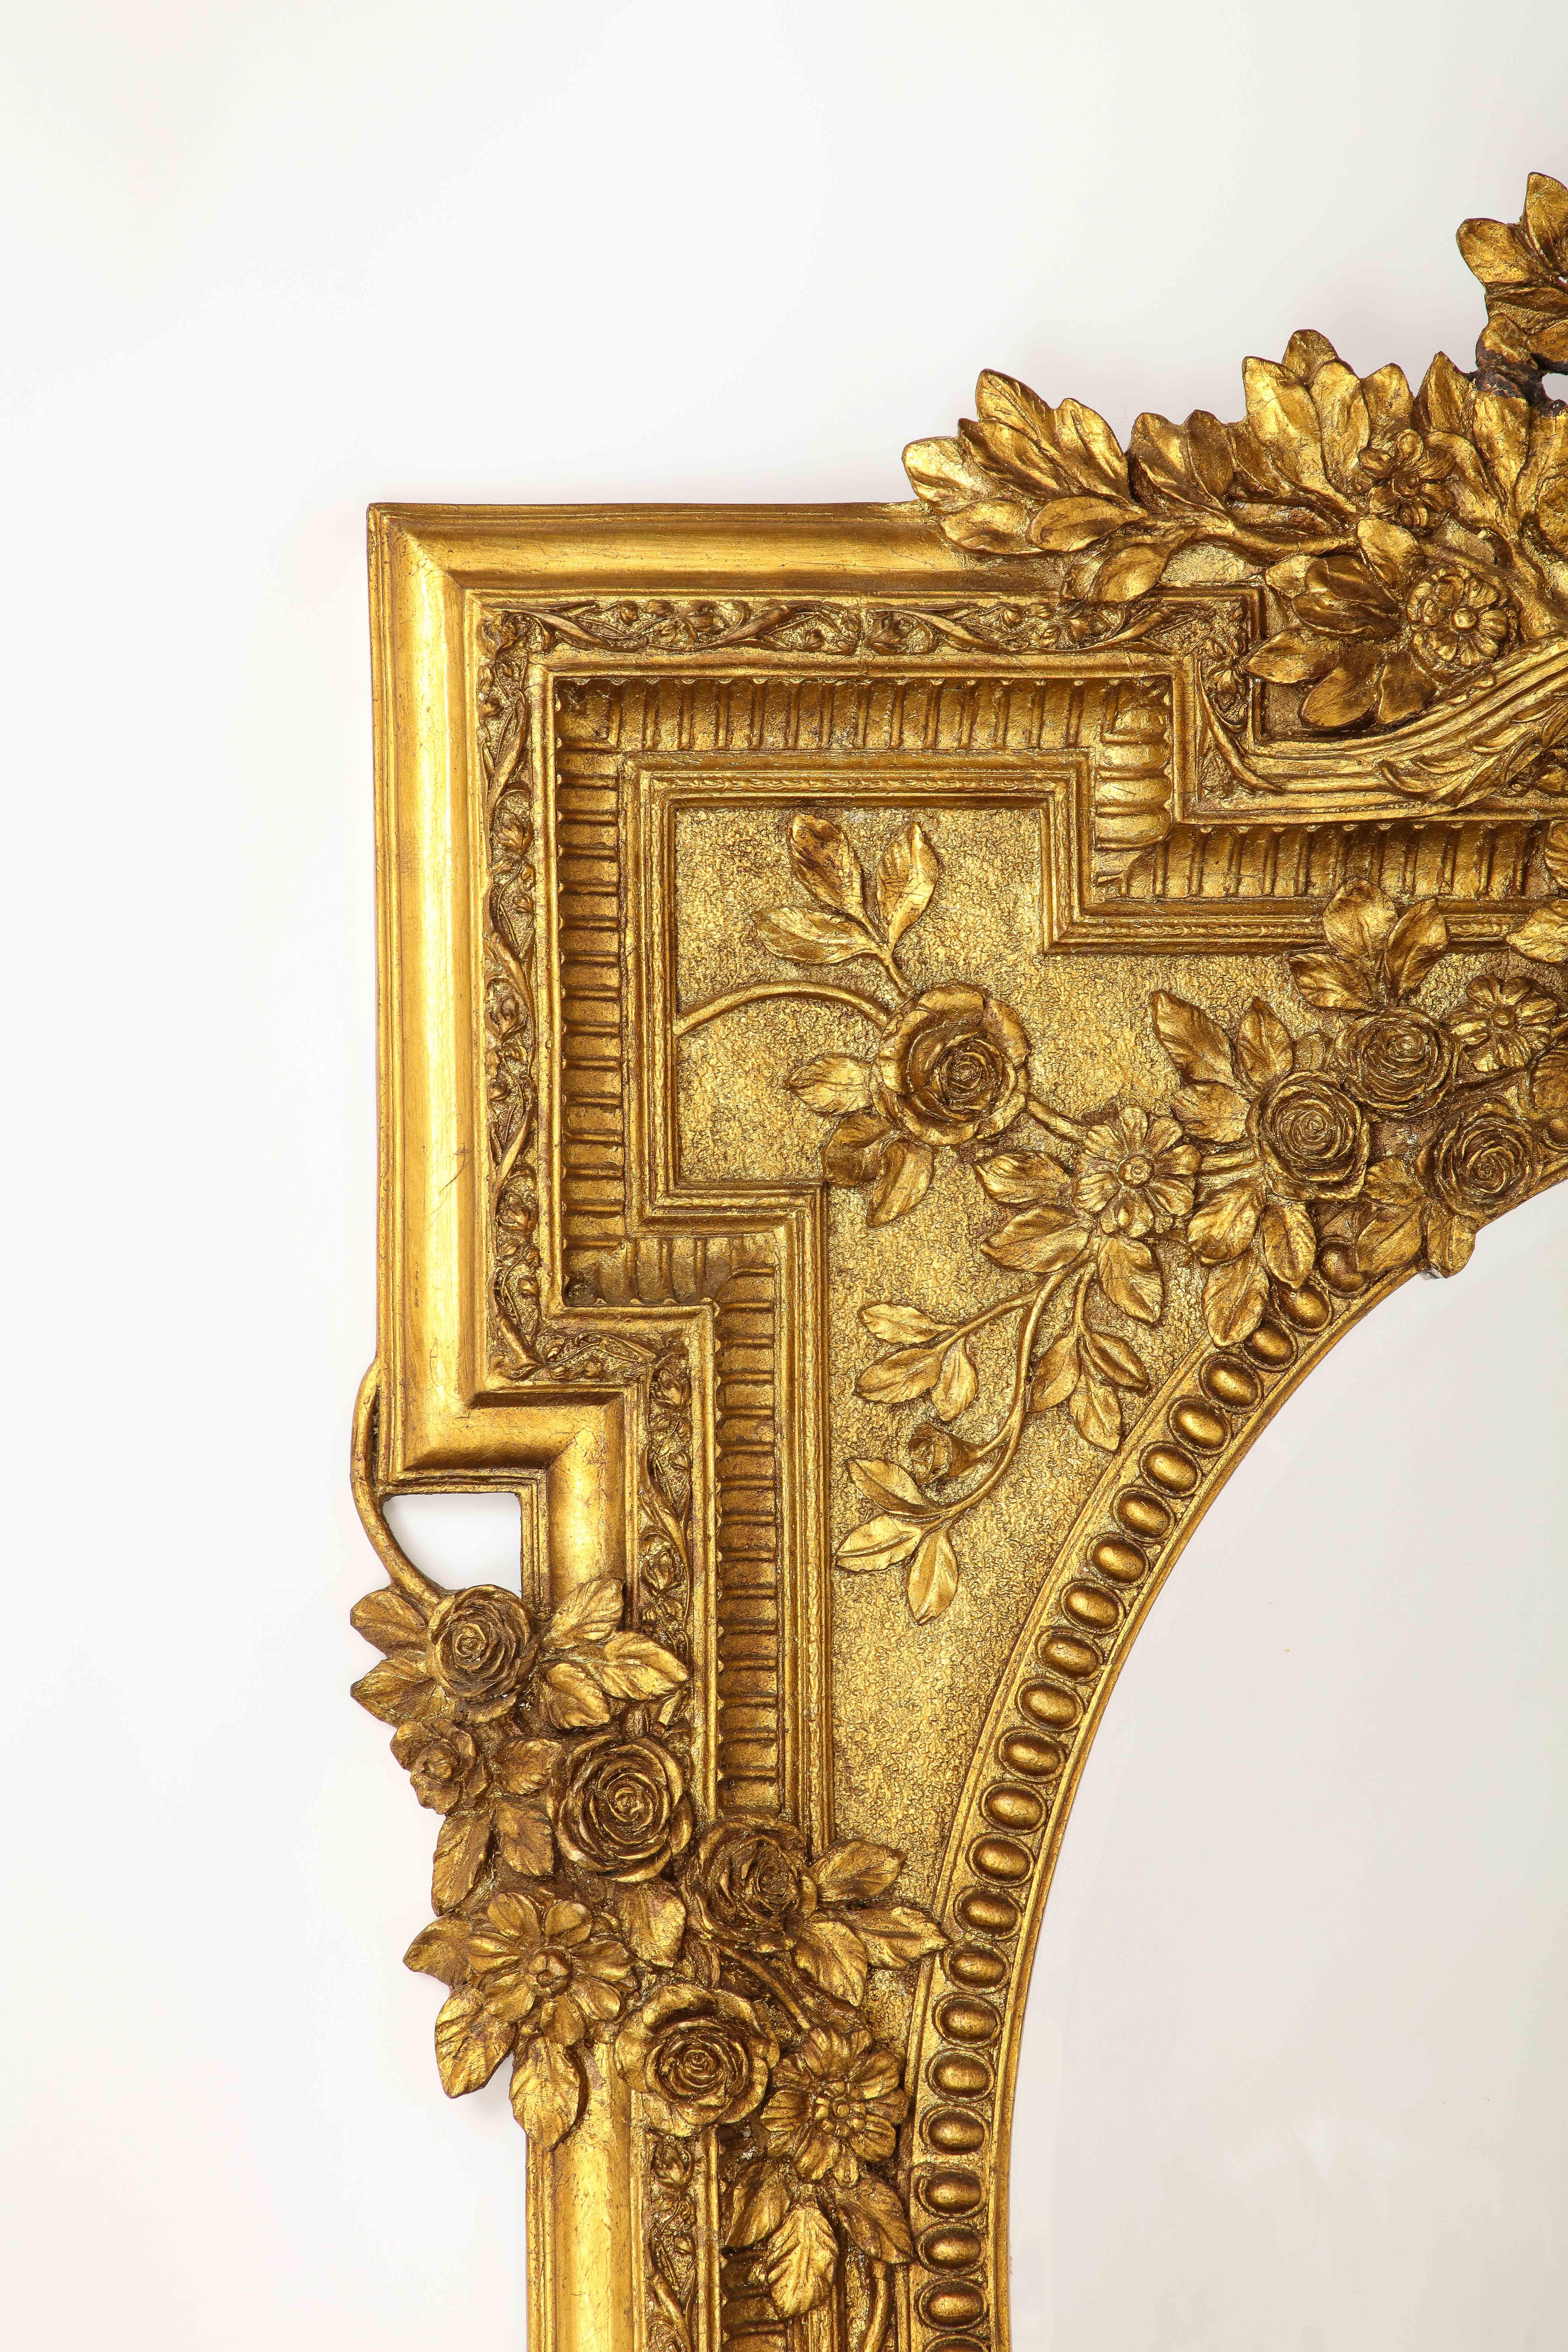 Marvelous French Giltwood Hand-Carved Beveled Mirror with Floral Vine Designs For Sale 1